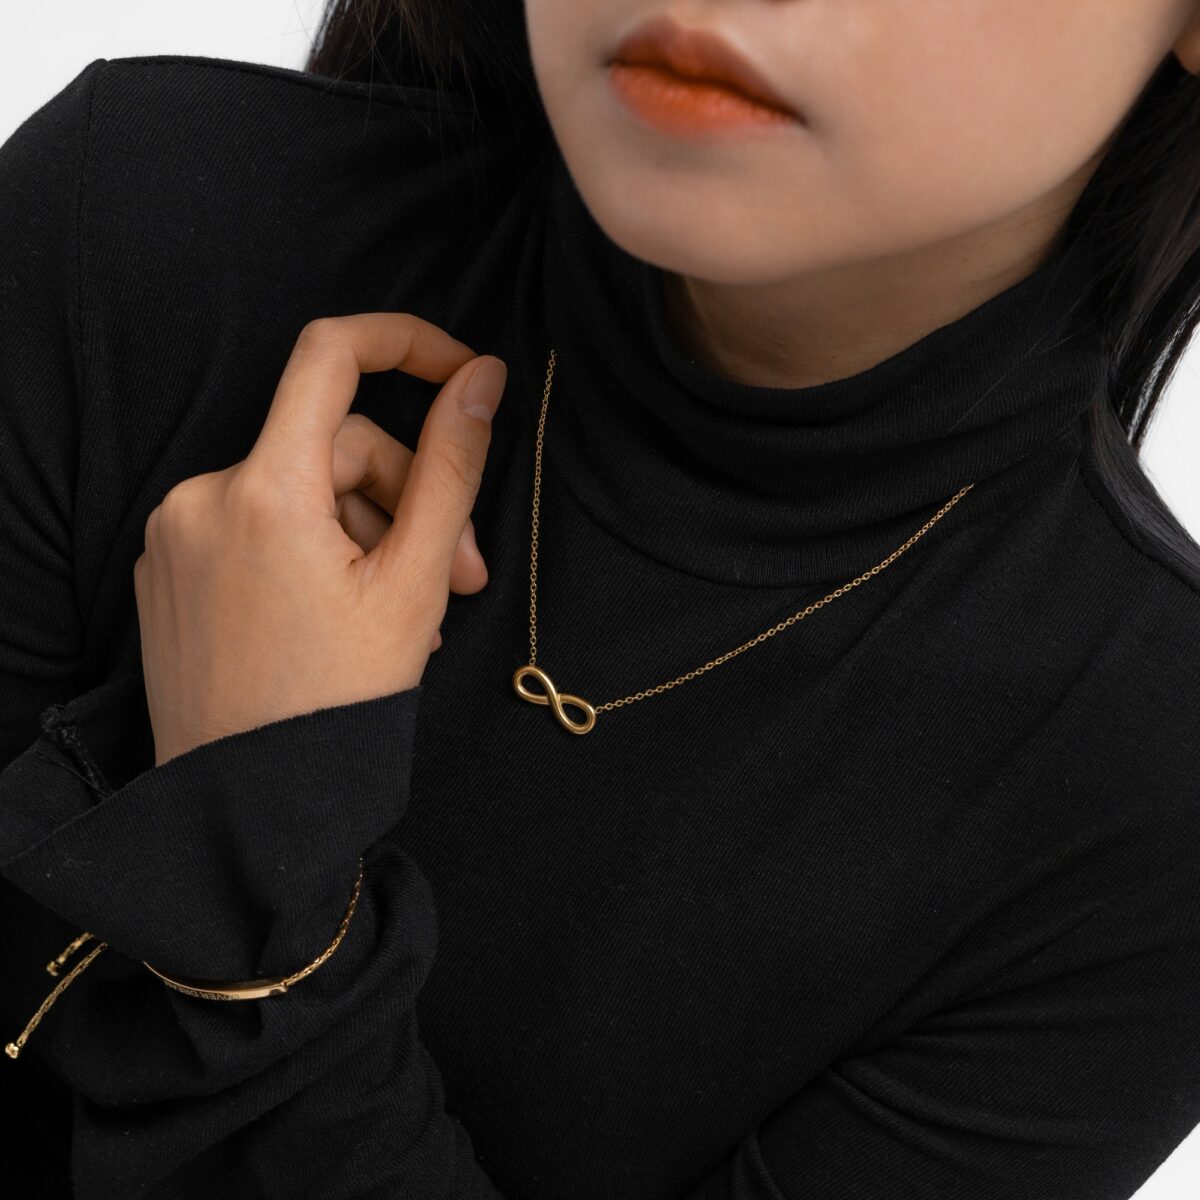 https://m.clubbella.co/product/infinity-gold-necklace/ DSC06606-1